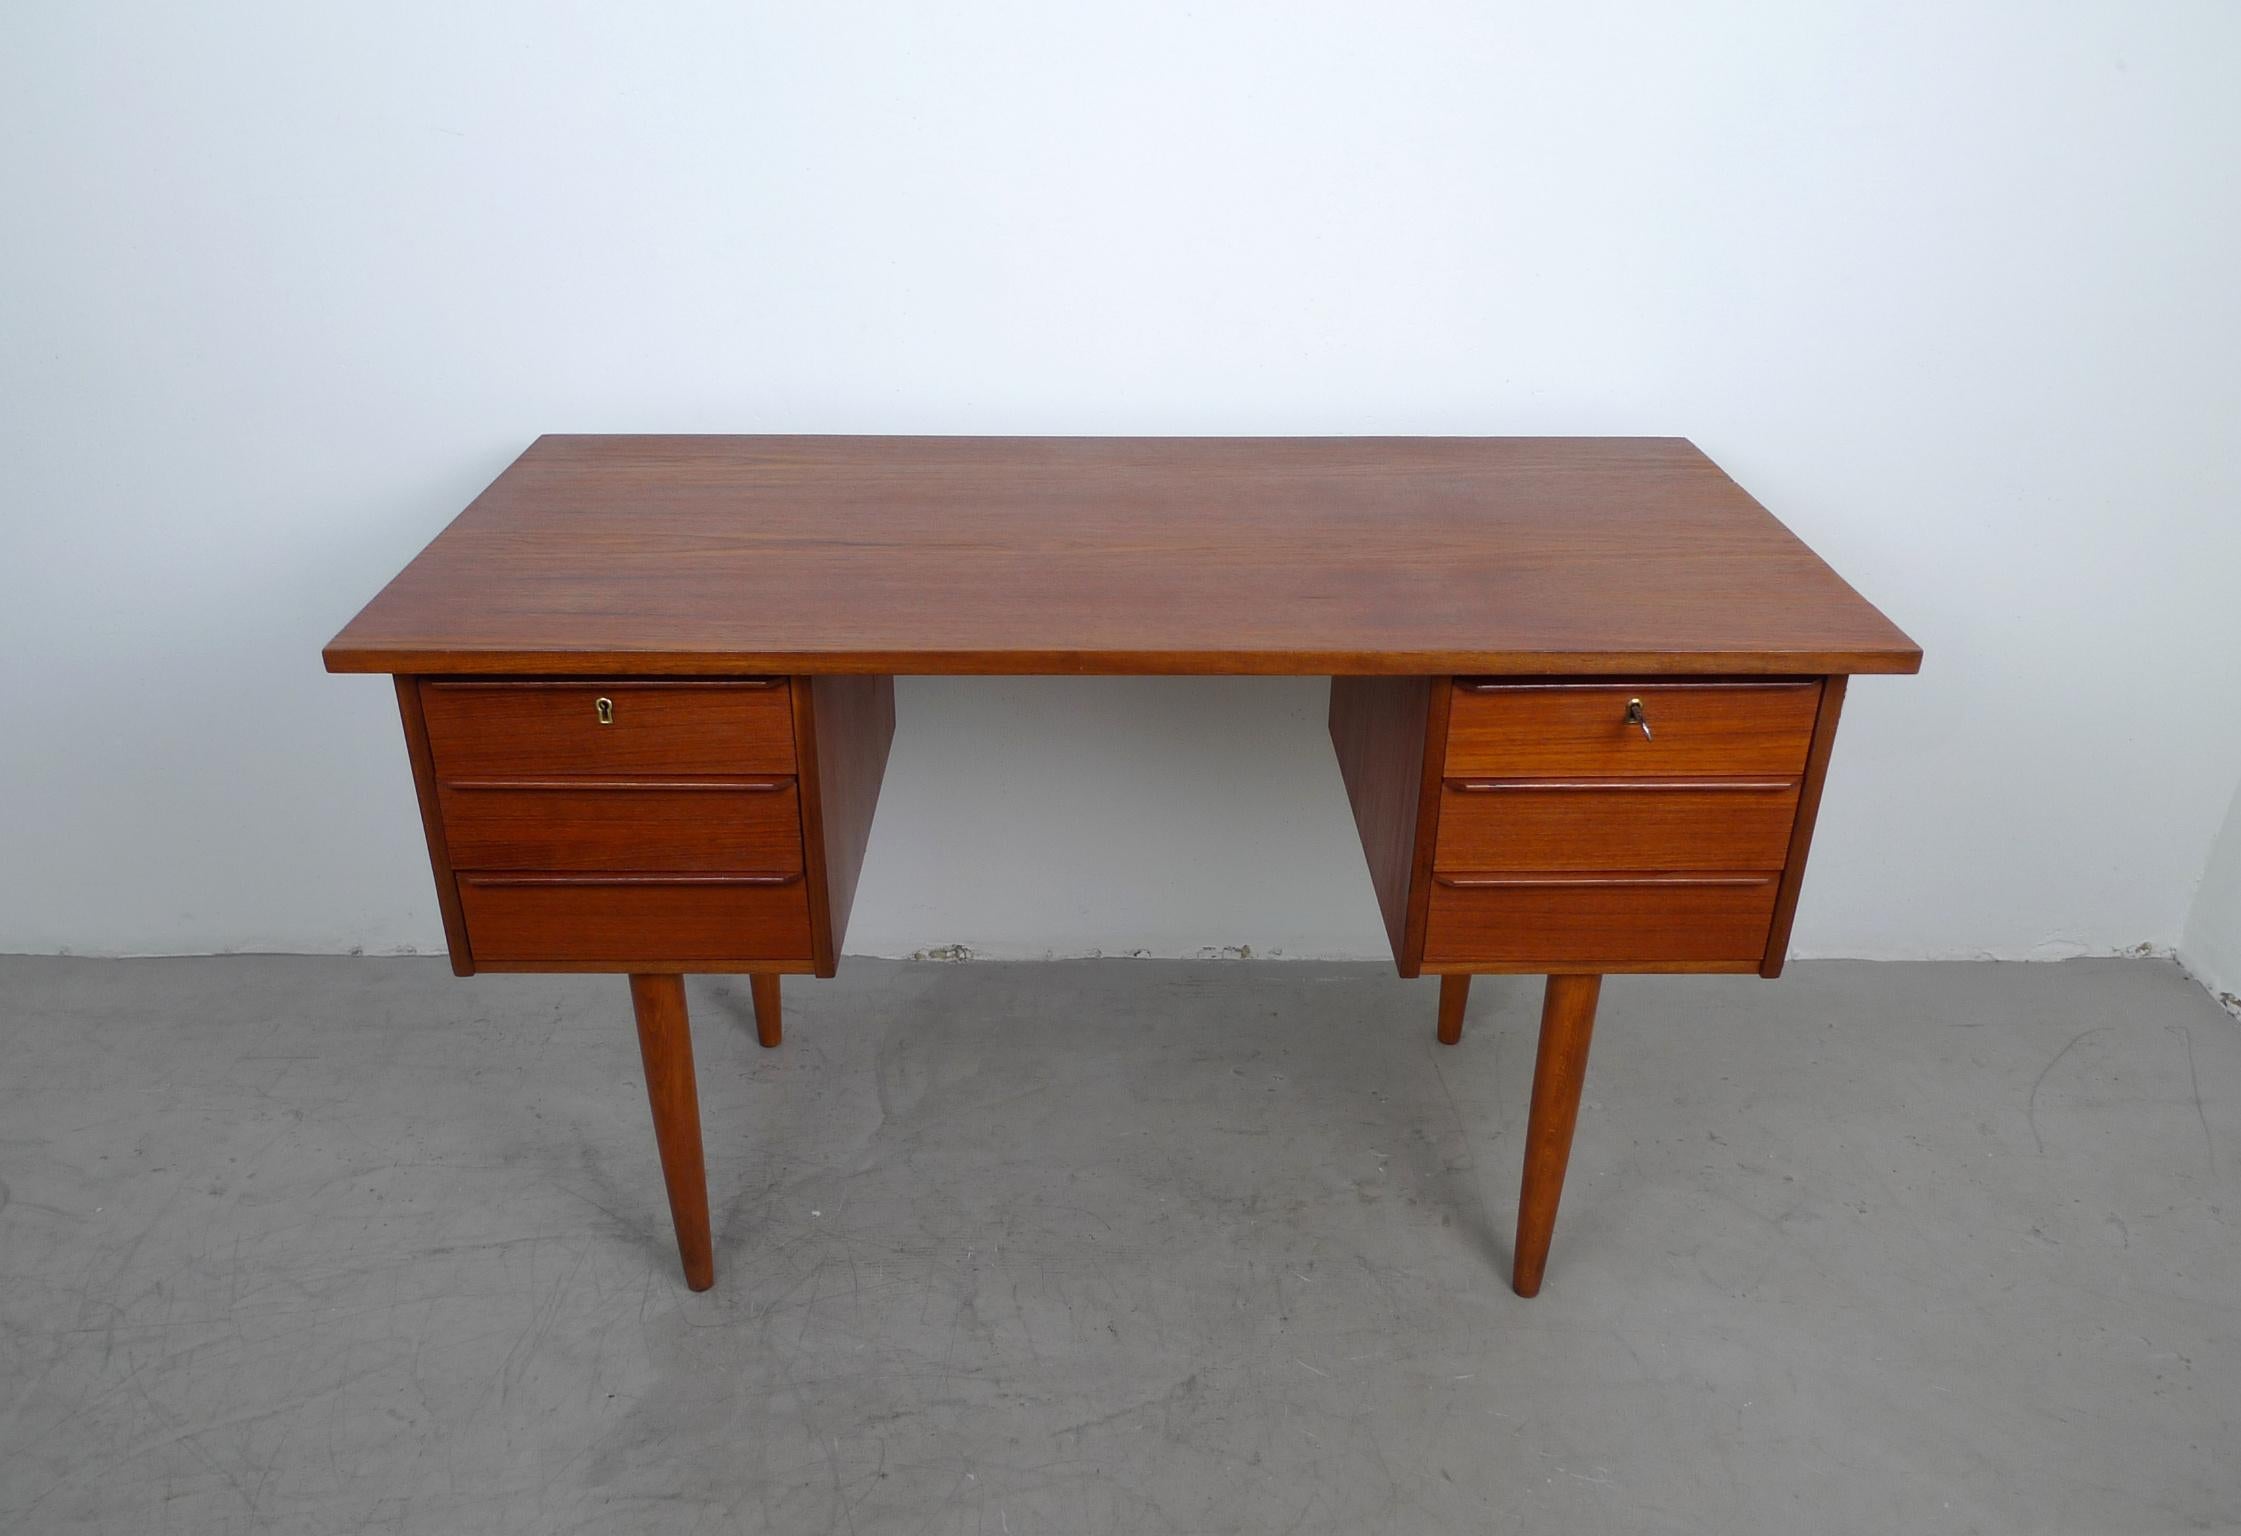 This small teak desk features six drawers. It has two upper drawers that are fitted with a mortise lock. The desk is in very good original condition, only the right side shows one scratch.